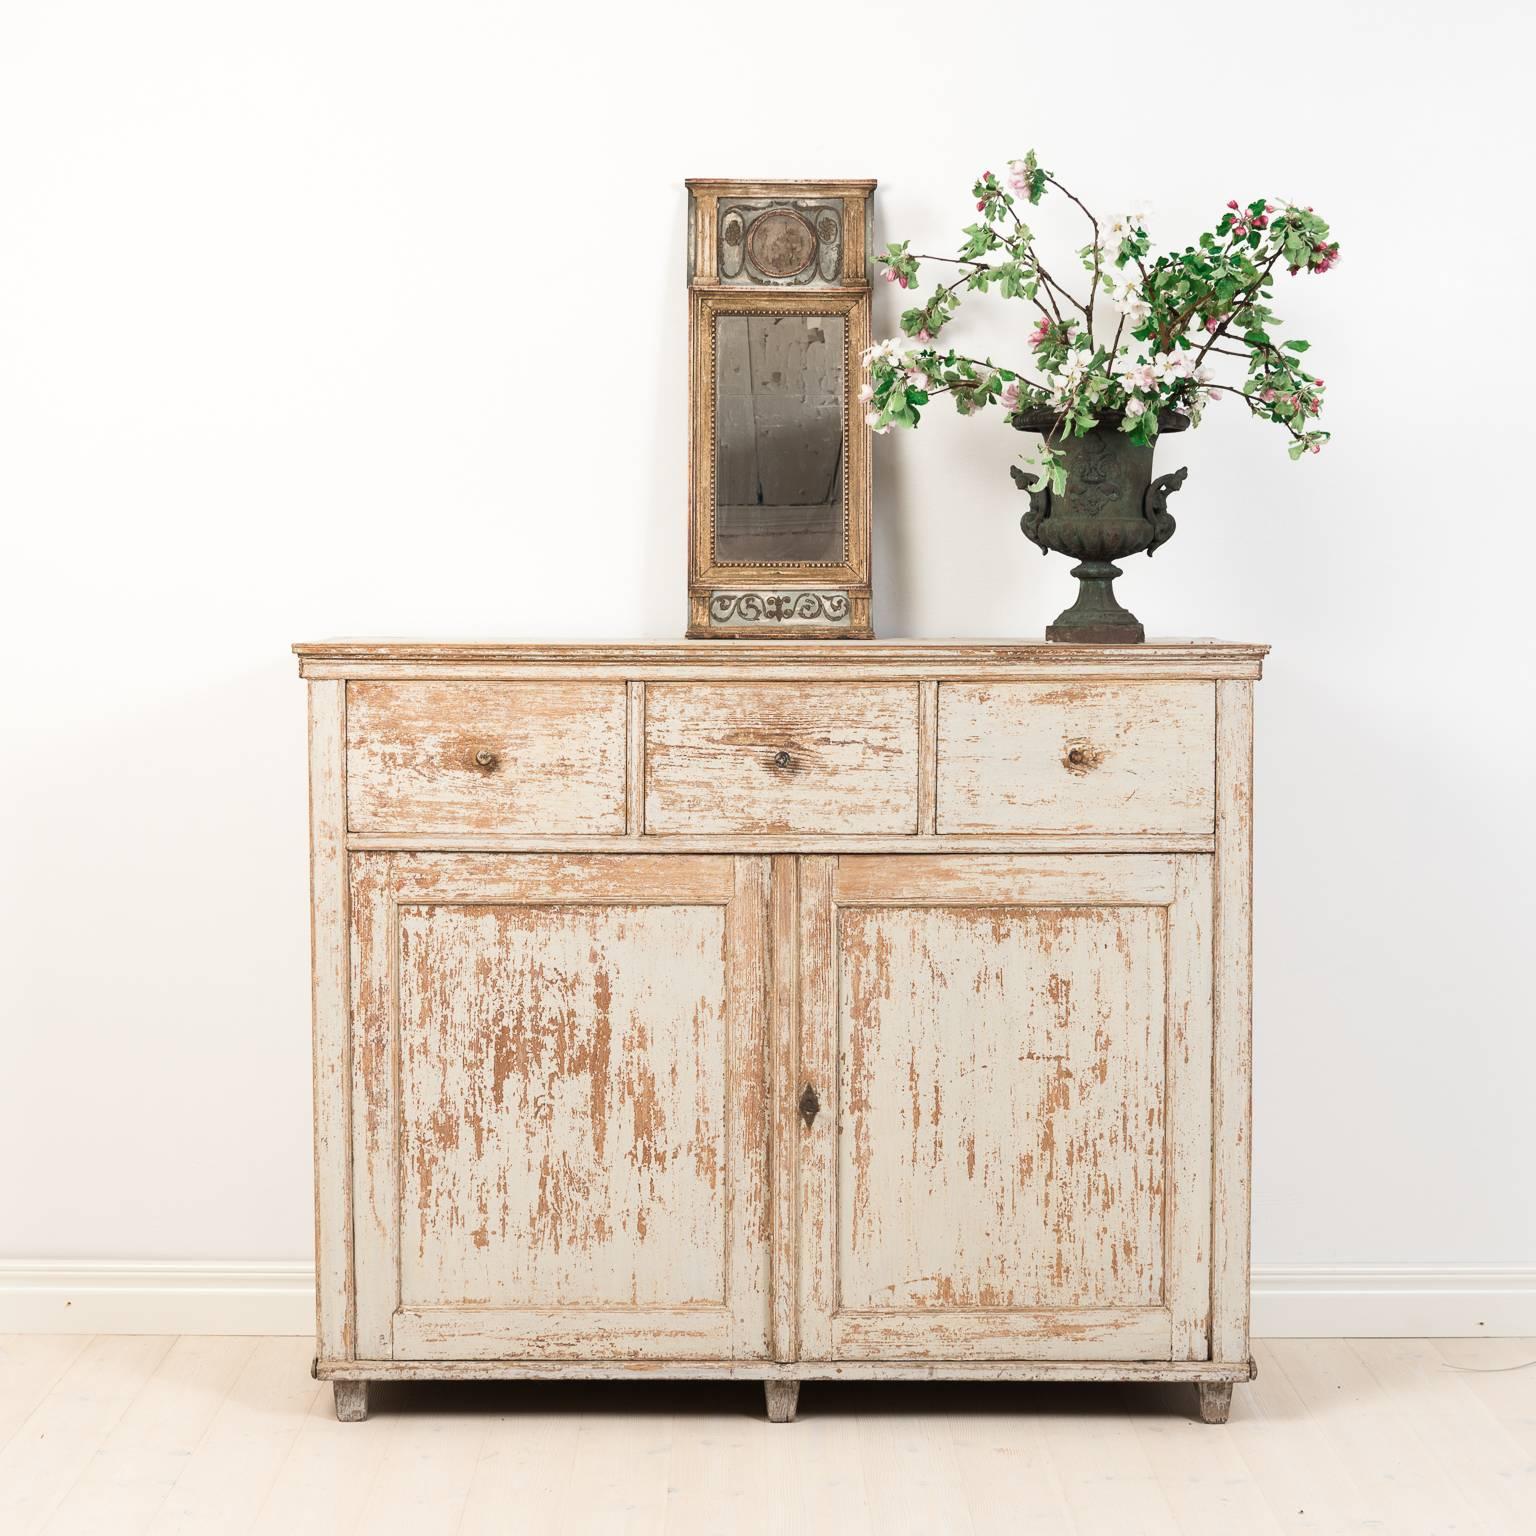 Gustavian sideboard from northern Sweden. Dry scraped to original paint. The drawers’ knobs are in slightly different shapes but all original to the sideboard. Original lock and supplied key.